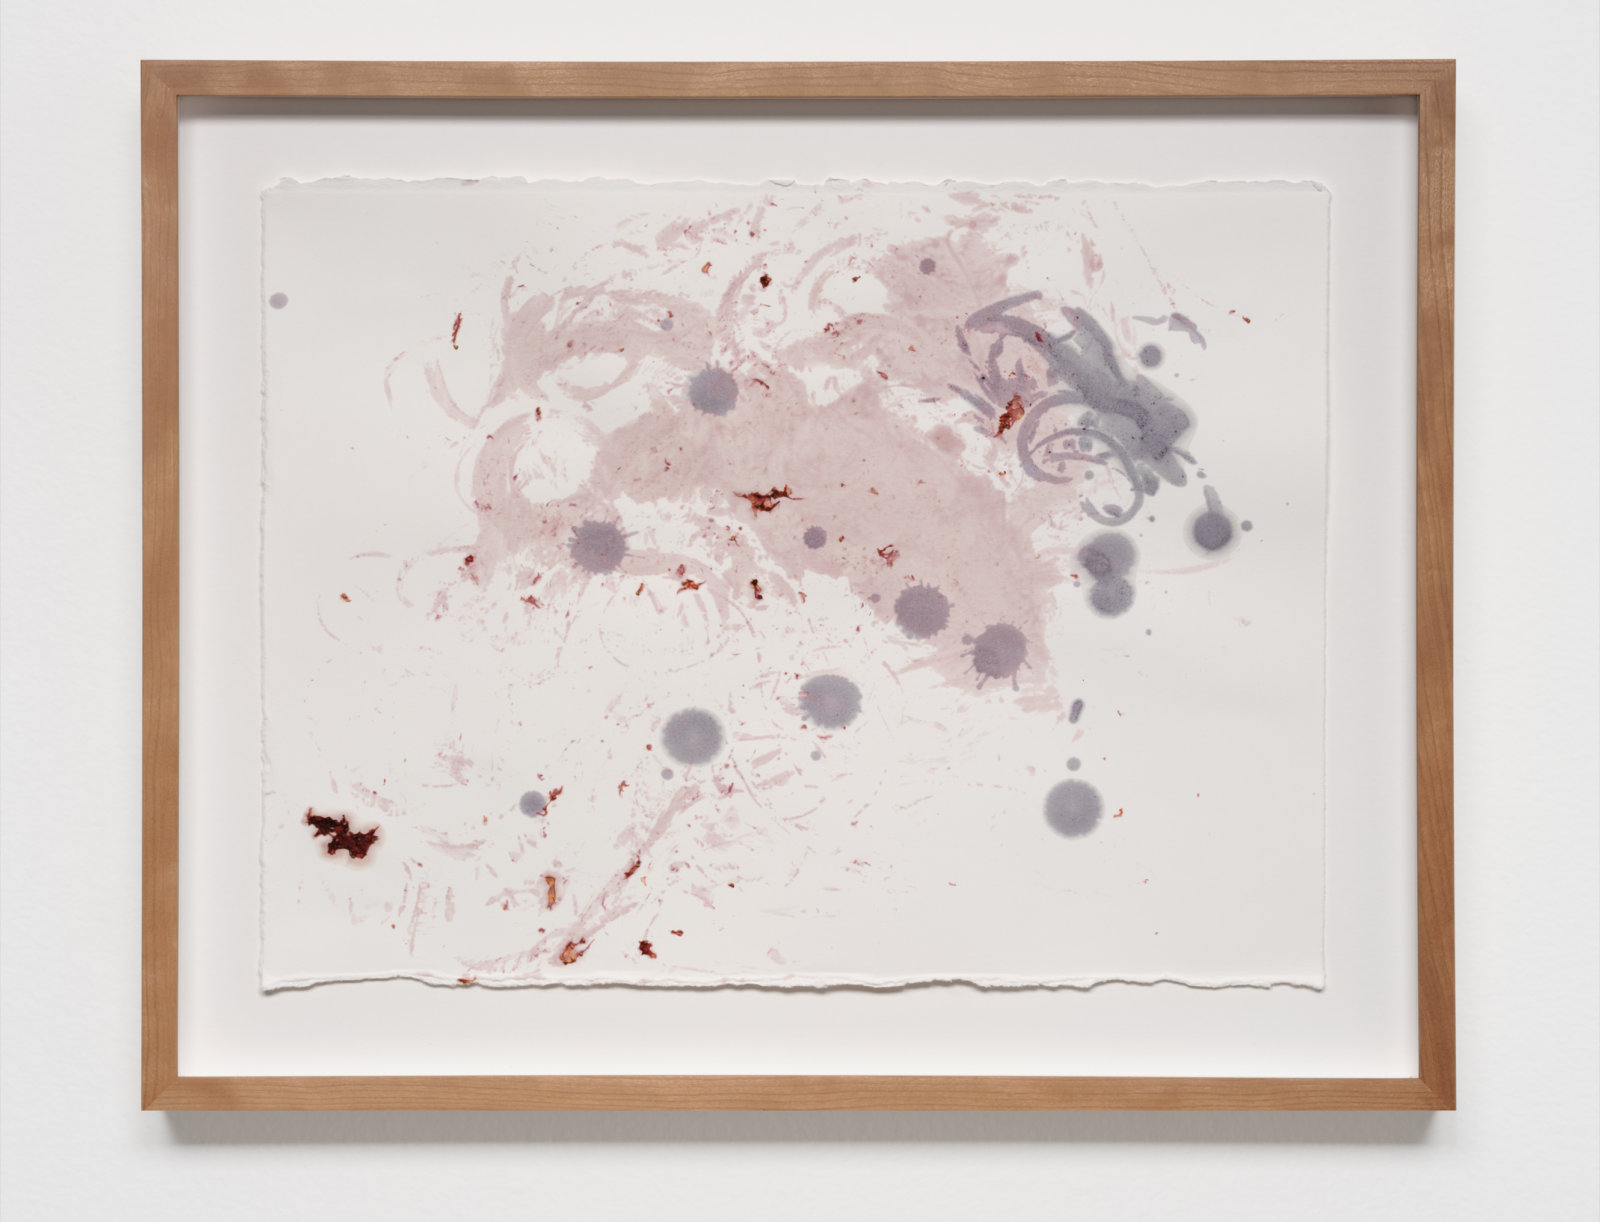 Tanya Lukin Linklater, Hair Print 3, 2022, strawberry, blueberry, raspberry pigments transferred to paper with artist’s hair, 15 x 18 in. (38 x 47 cm)